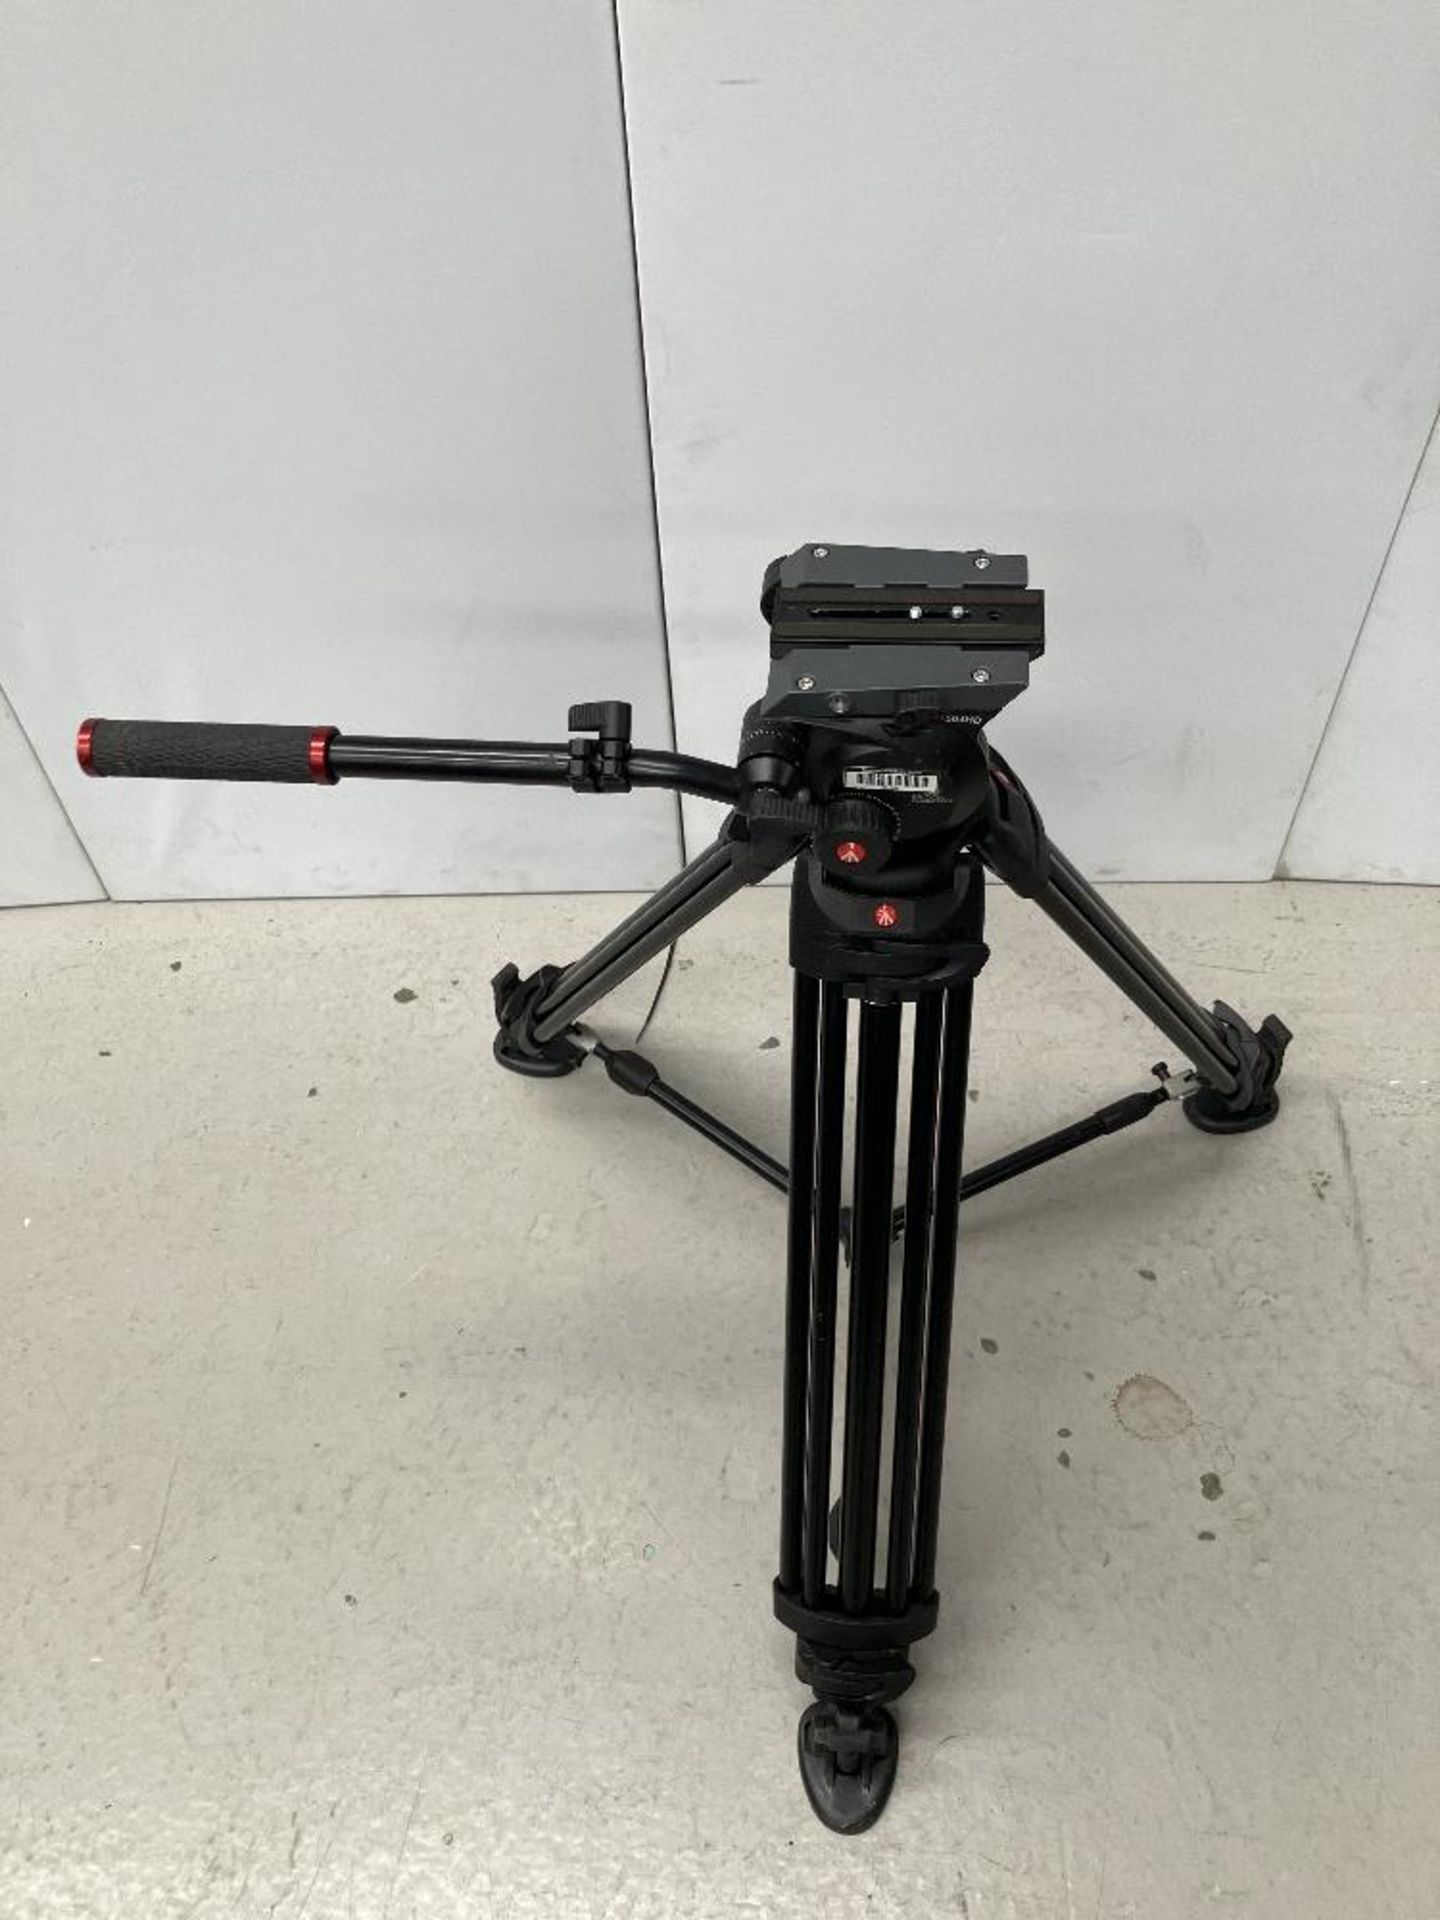 Manfrotto 504HD Tripod Head and 546B Tripod with Carbon Fibre Legs with Protective Tube - Image 5 of 6